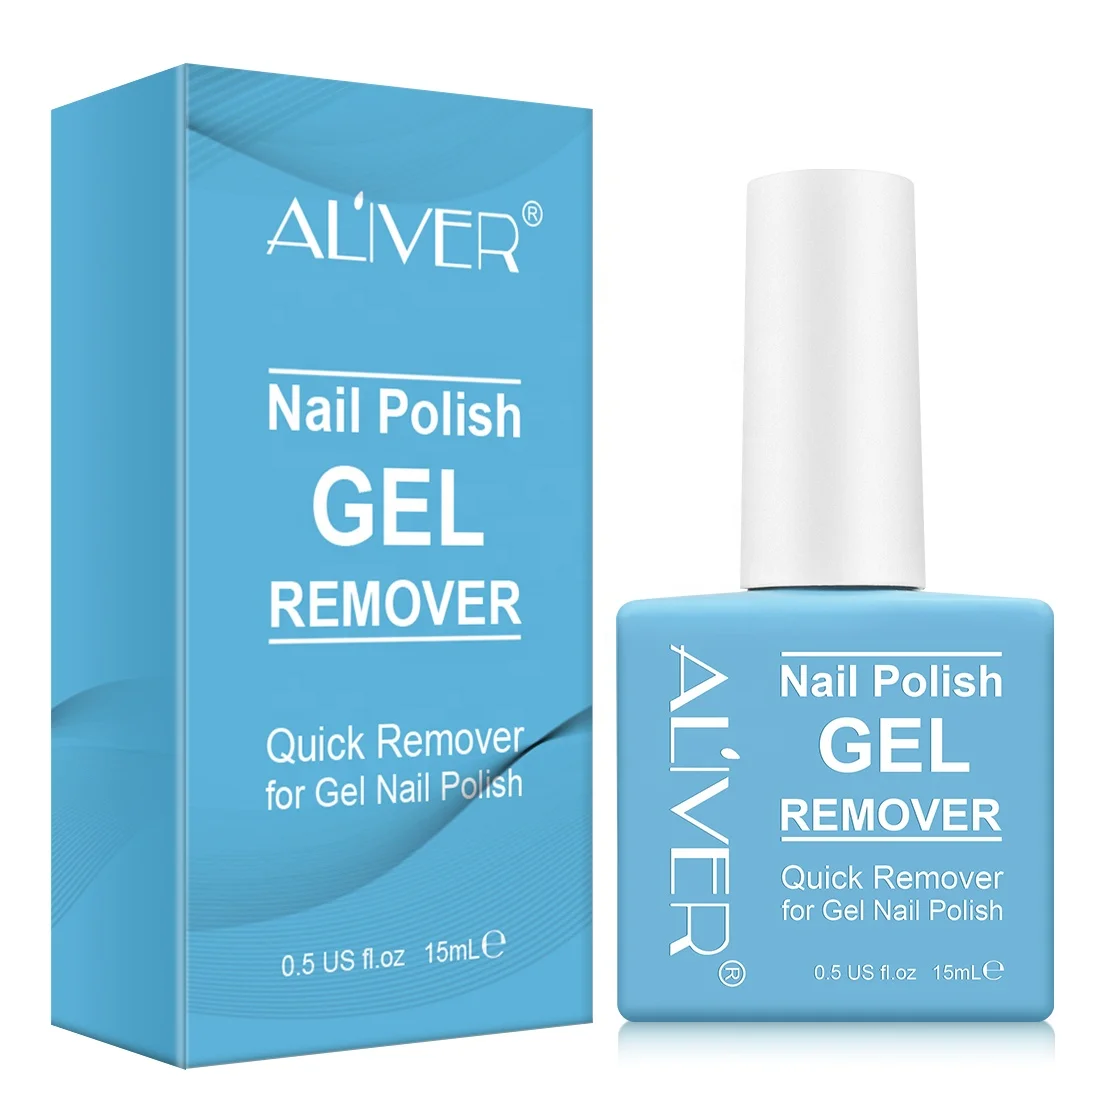 

ALIVER Magic Nail Polish Remover Professional Removes Soak-Off Gel Nail Polish Easily Quickly Don't Hurt Your Nails 15 ml